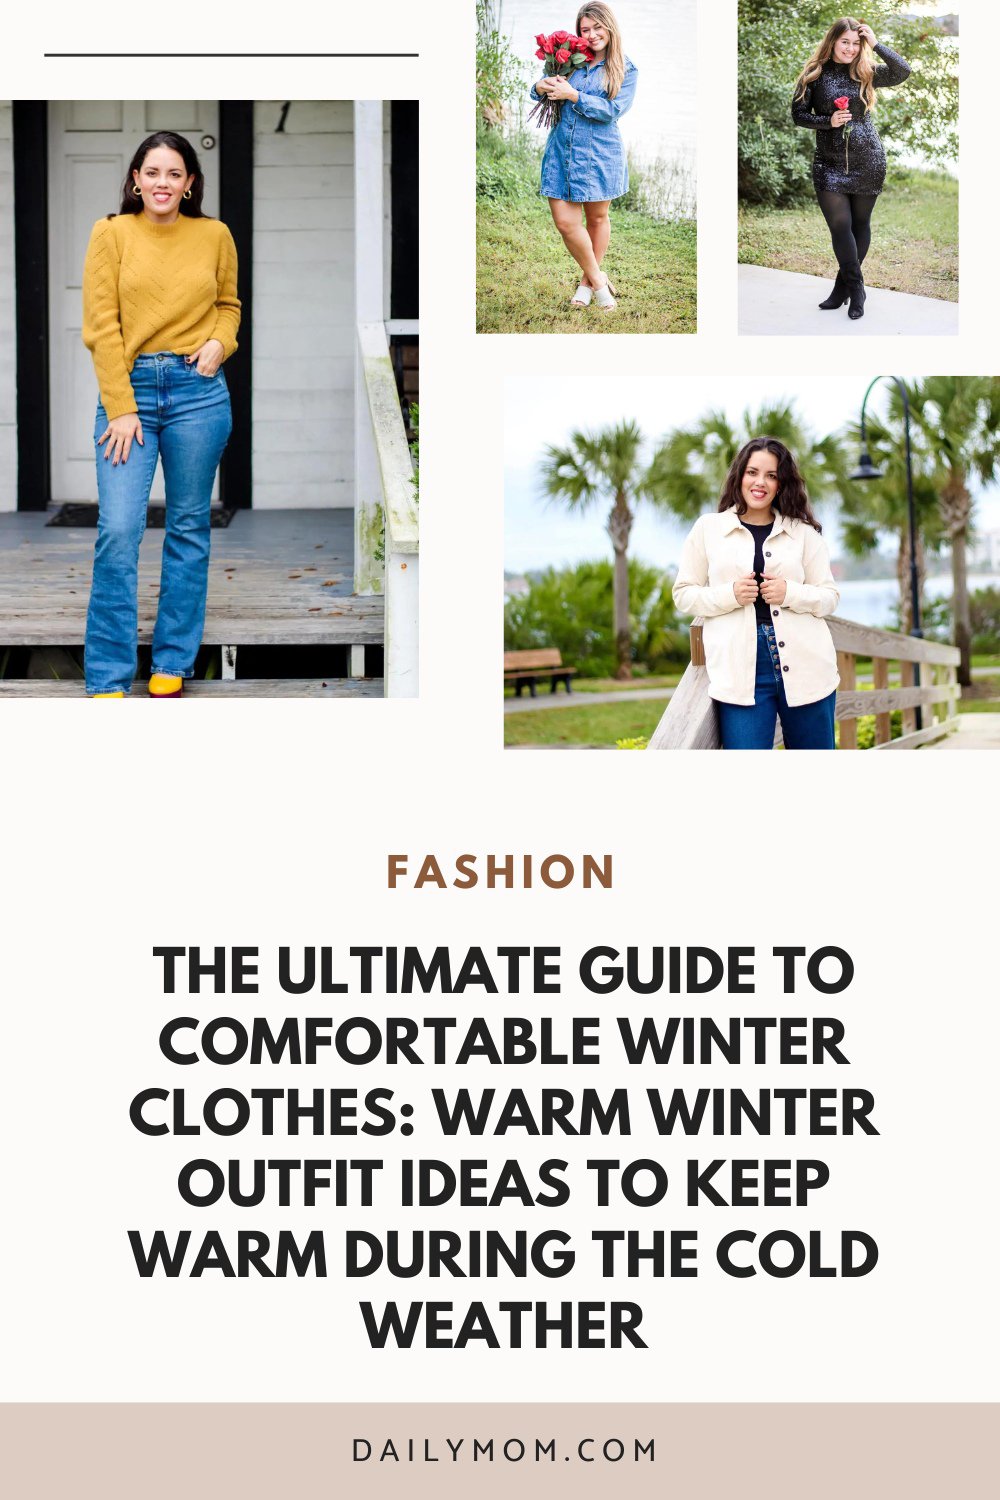 The Ultimate Guide To Comfortable Winter Clothes: Winter Outfit Ideas To Keep Warm During The Cold Weather 104 Daily Mom, Magazine For Families